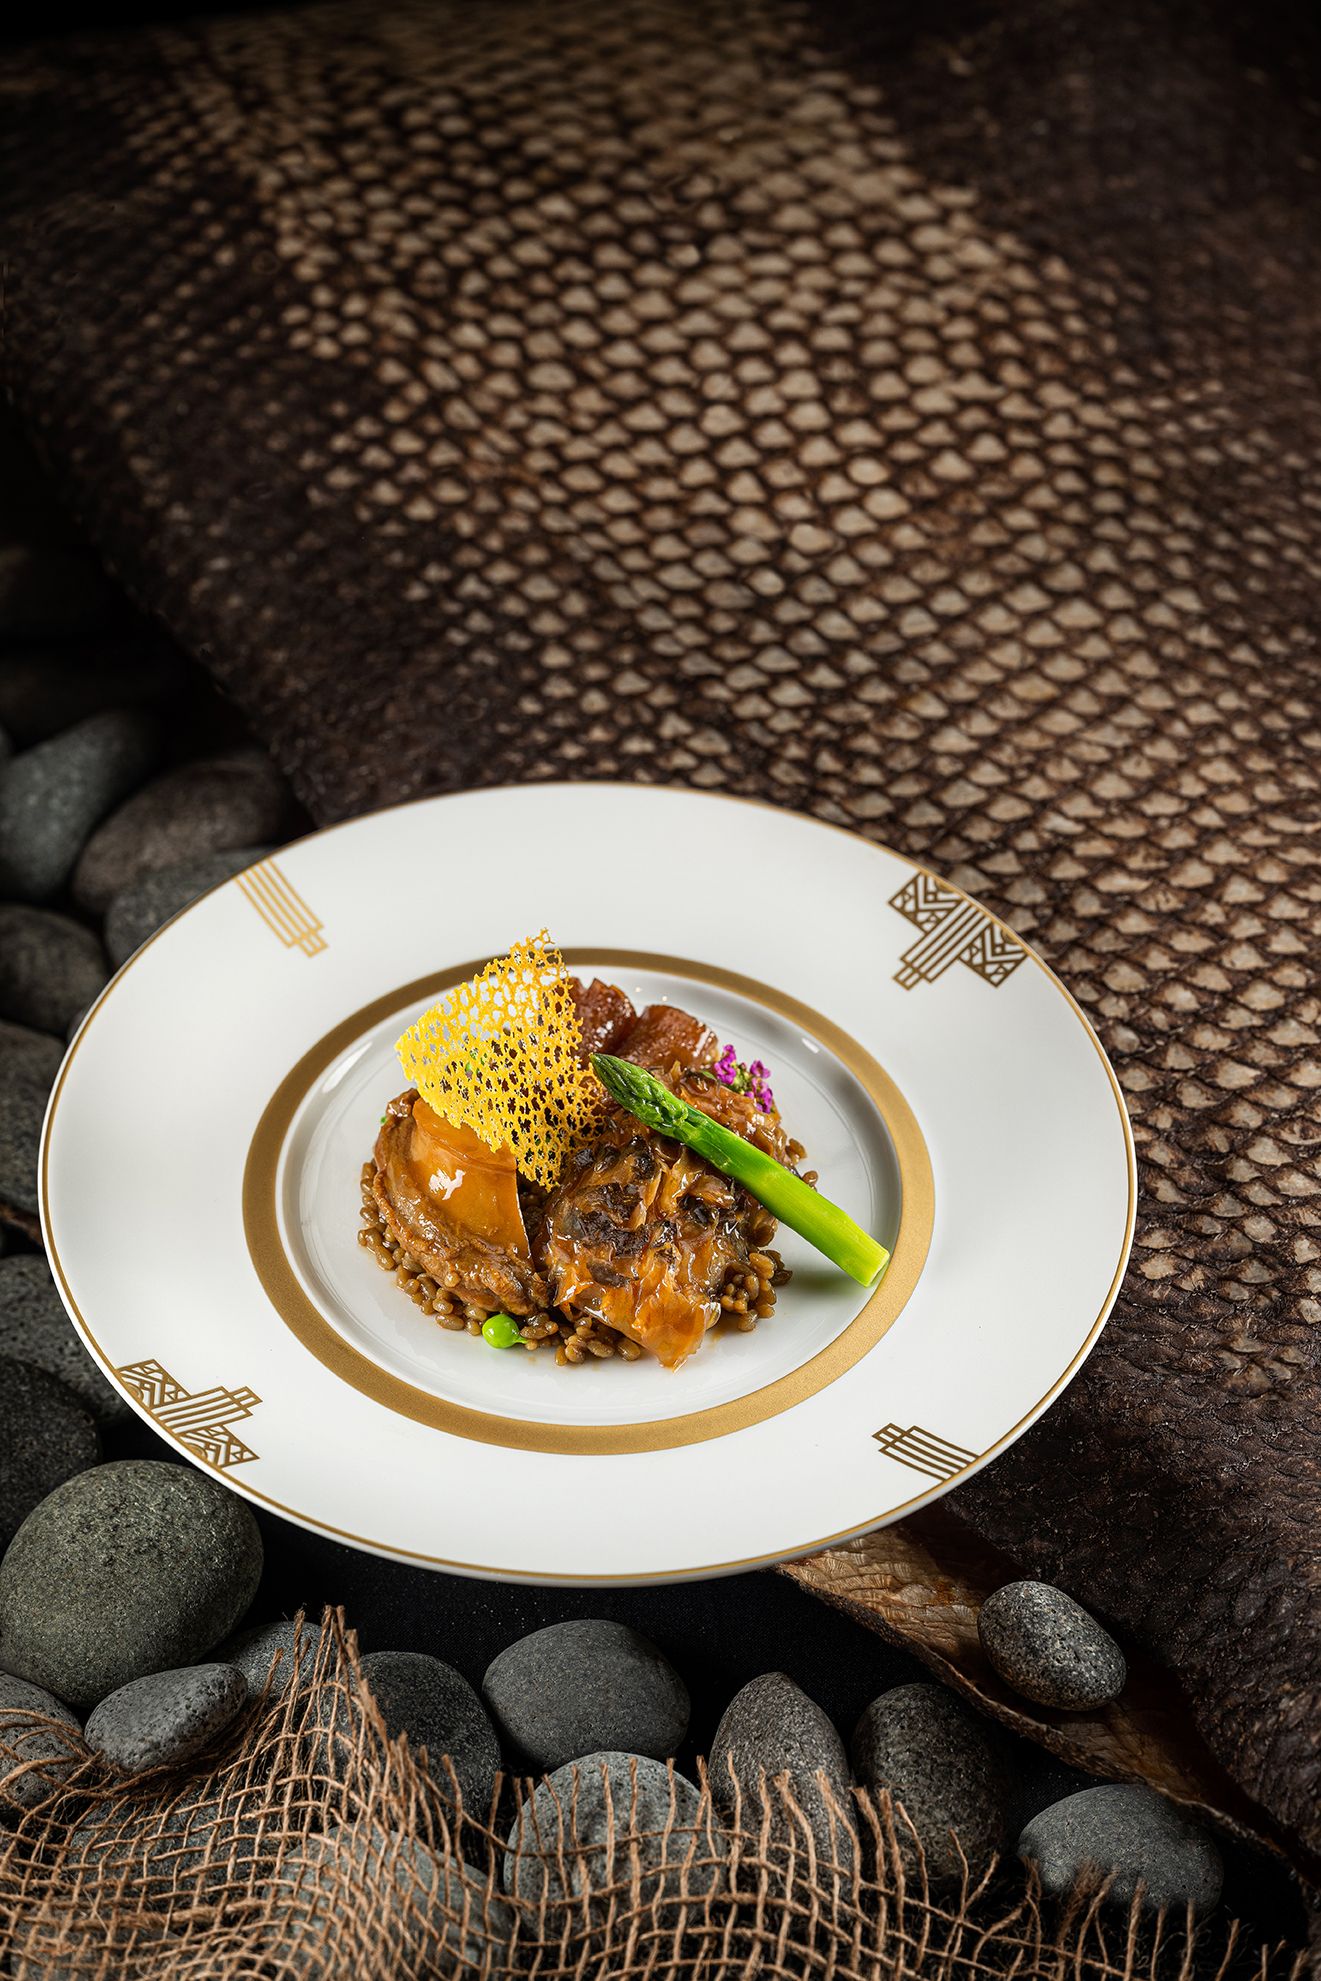 Braised Deer Sinew with Australia Abalone, Giant Grouper Skin and Rock Rice in Superior Sauce